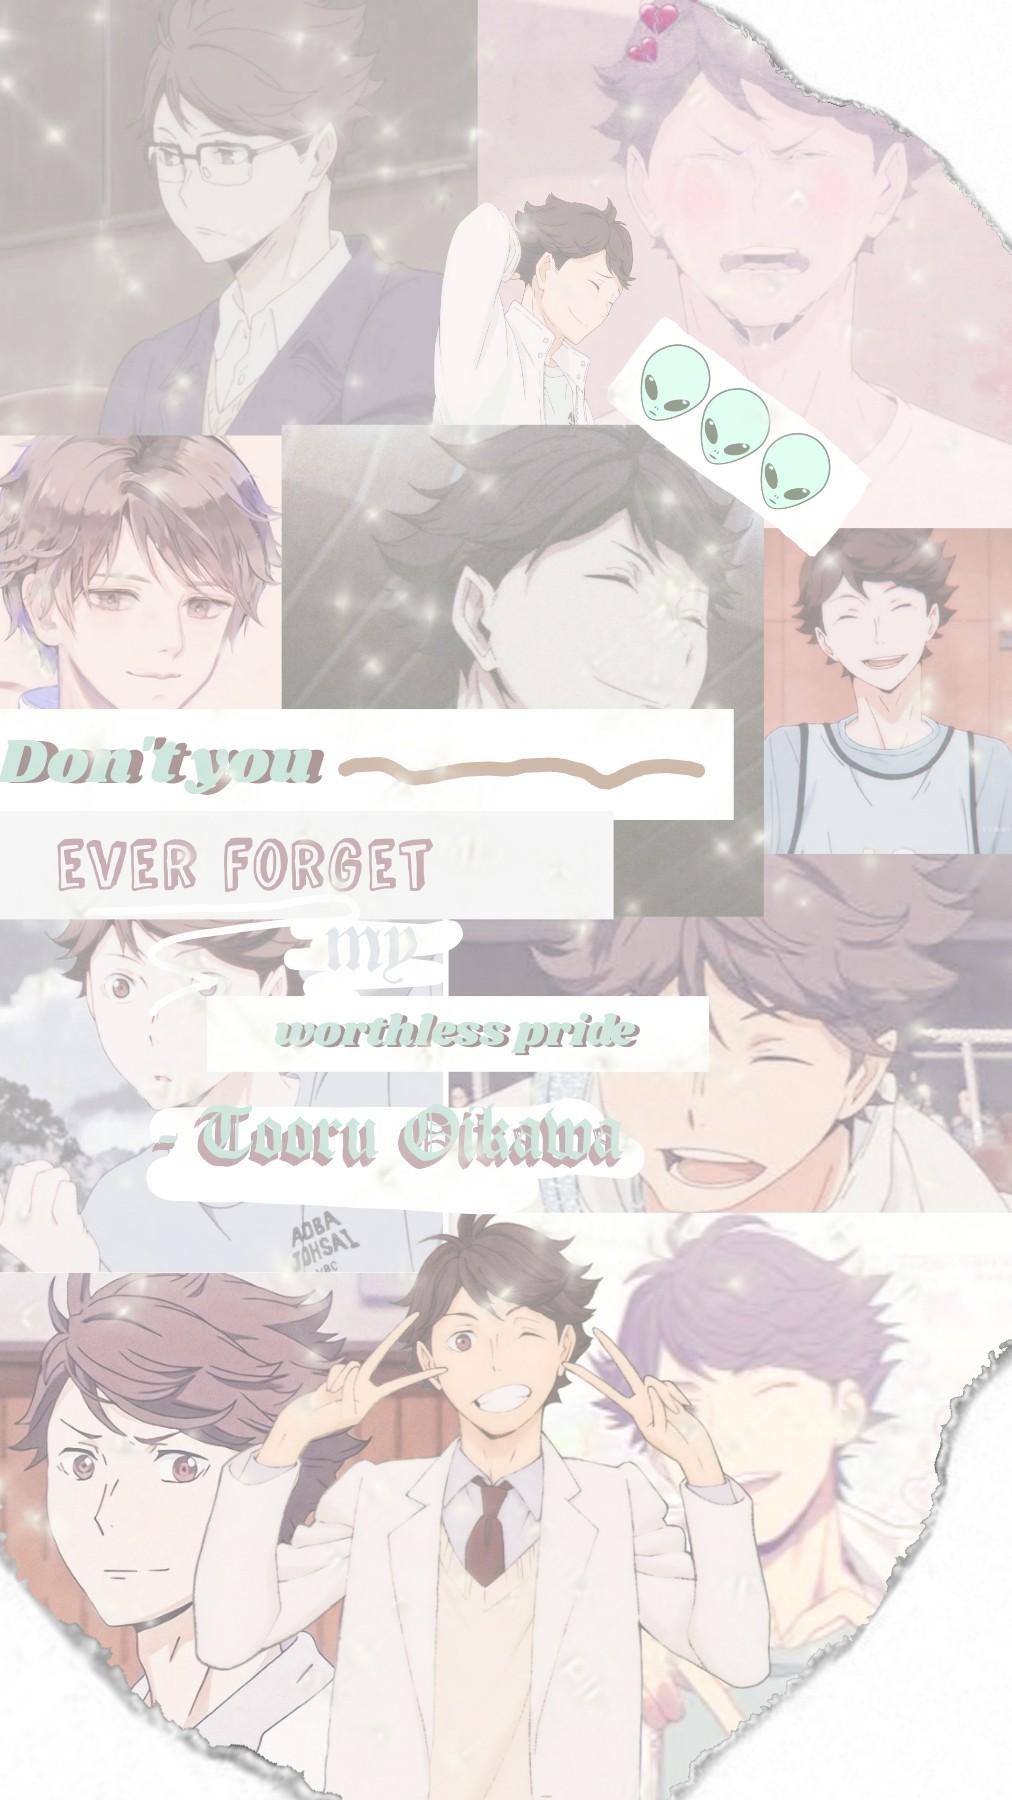 🤍TAP🤍
🏐20-07-22🏐
Hello muffins! Today is Tooru Oikawa's b-day! So I made this collage to wish this beautiful piece of trash a happy b-day 🎉 QOTD: What is your fave anime? AOTD: Haikyuu! Love y'all 💞